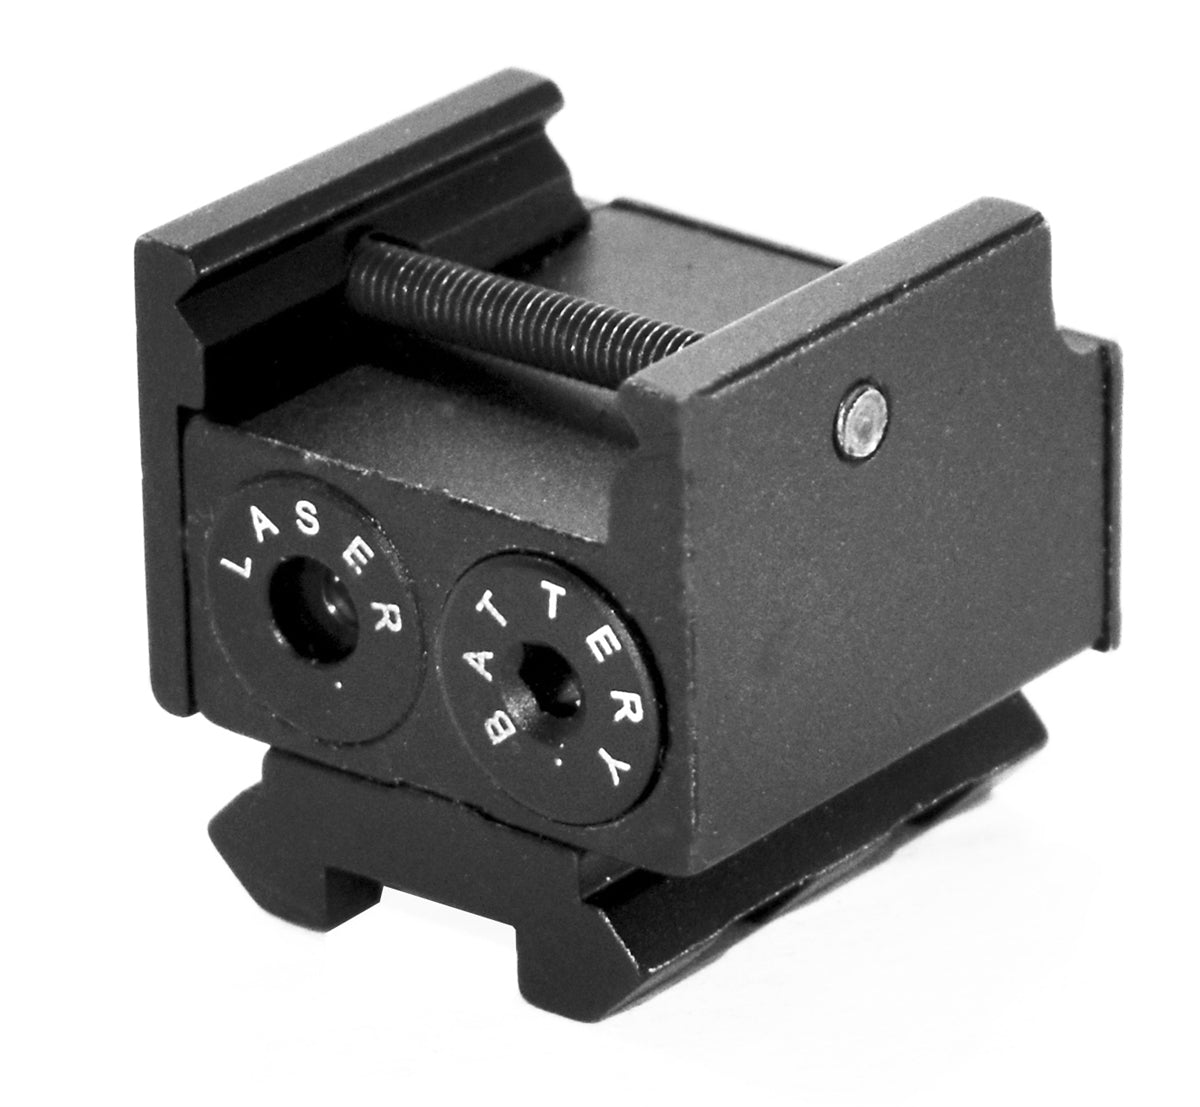 Trinity red dot Sight for Beretta APX Compact Tactical Optics Home Defense Accessory Picatinny Weaver Mount Adapter Aluminum Black.